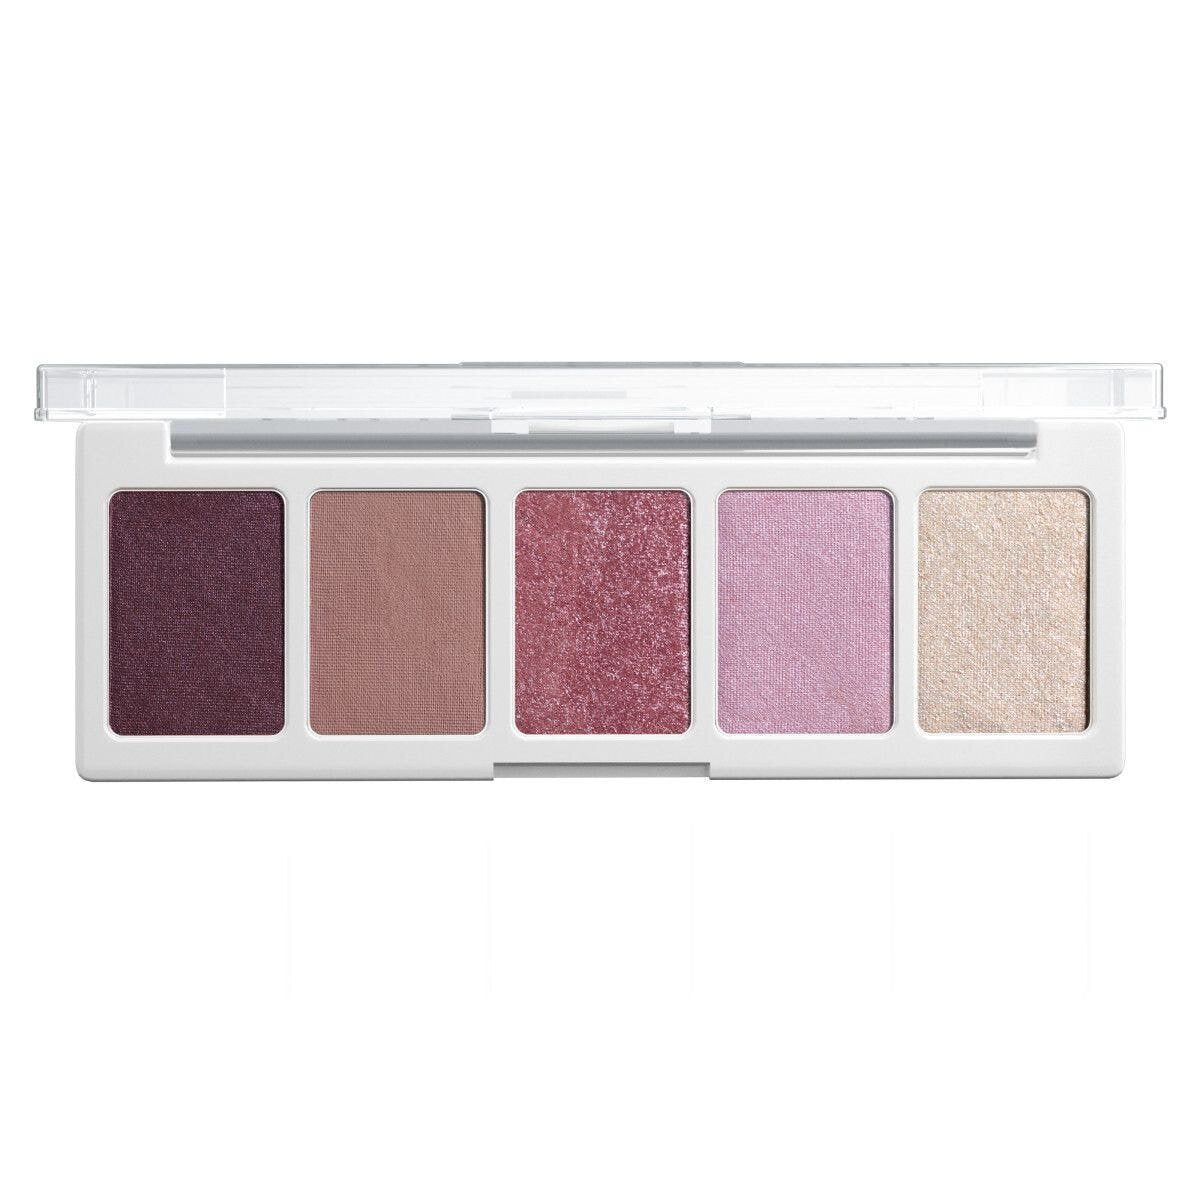 FORGET ME NOT COLOR ICON 5 PAN EYESHADOW PALETTE - WET N WILD